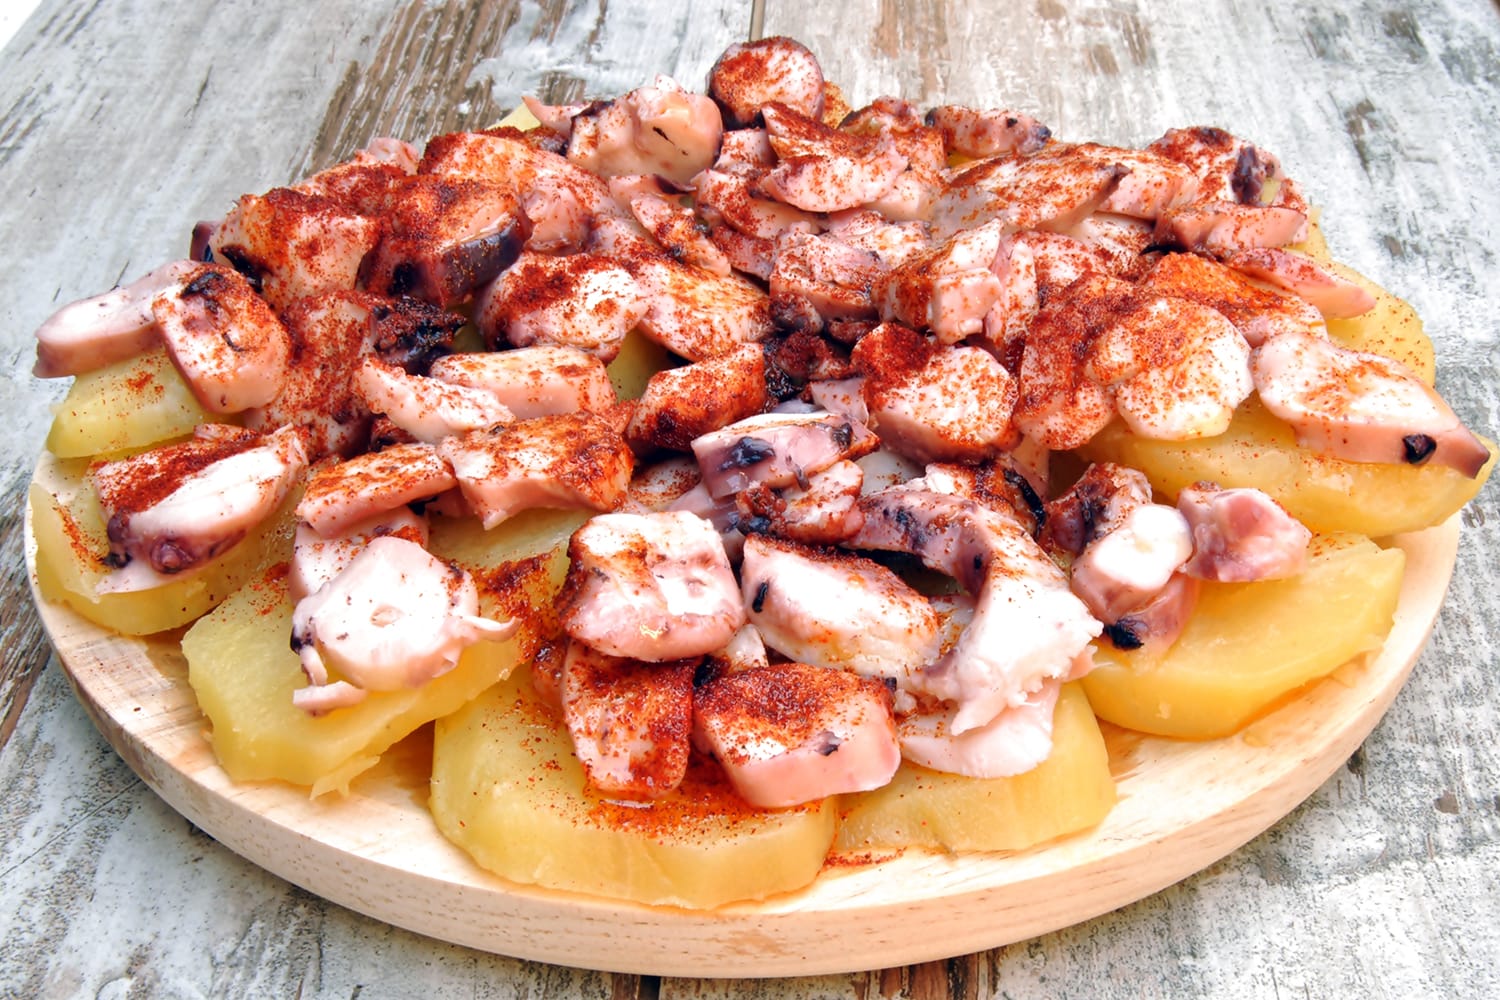 Octopus with paprika, potatoes and olive oil typical of Galicia, Spain